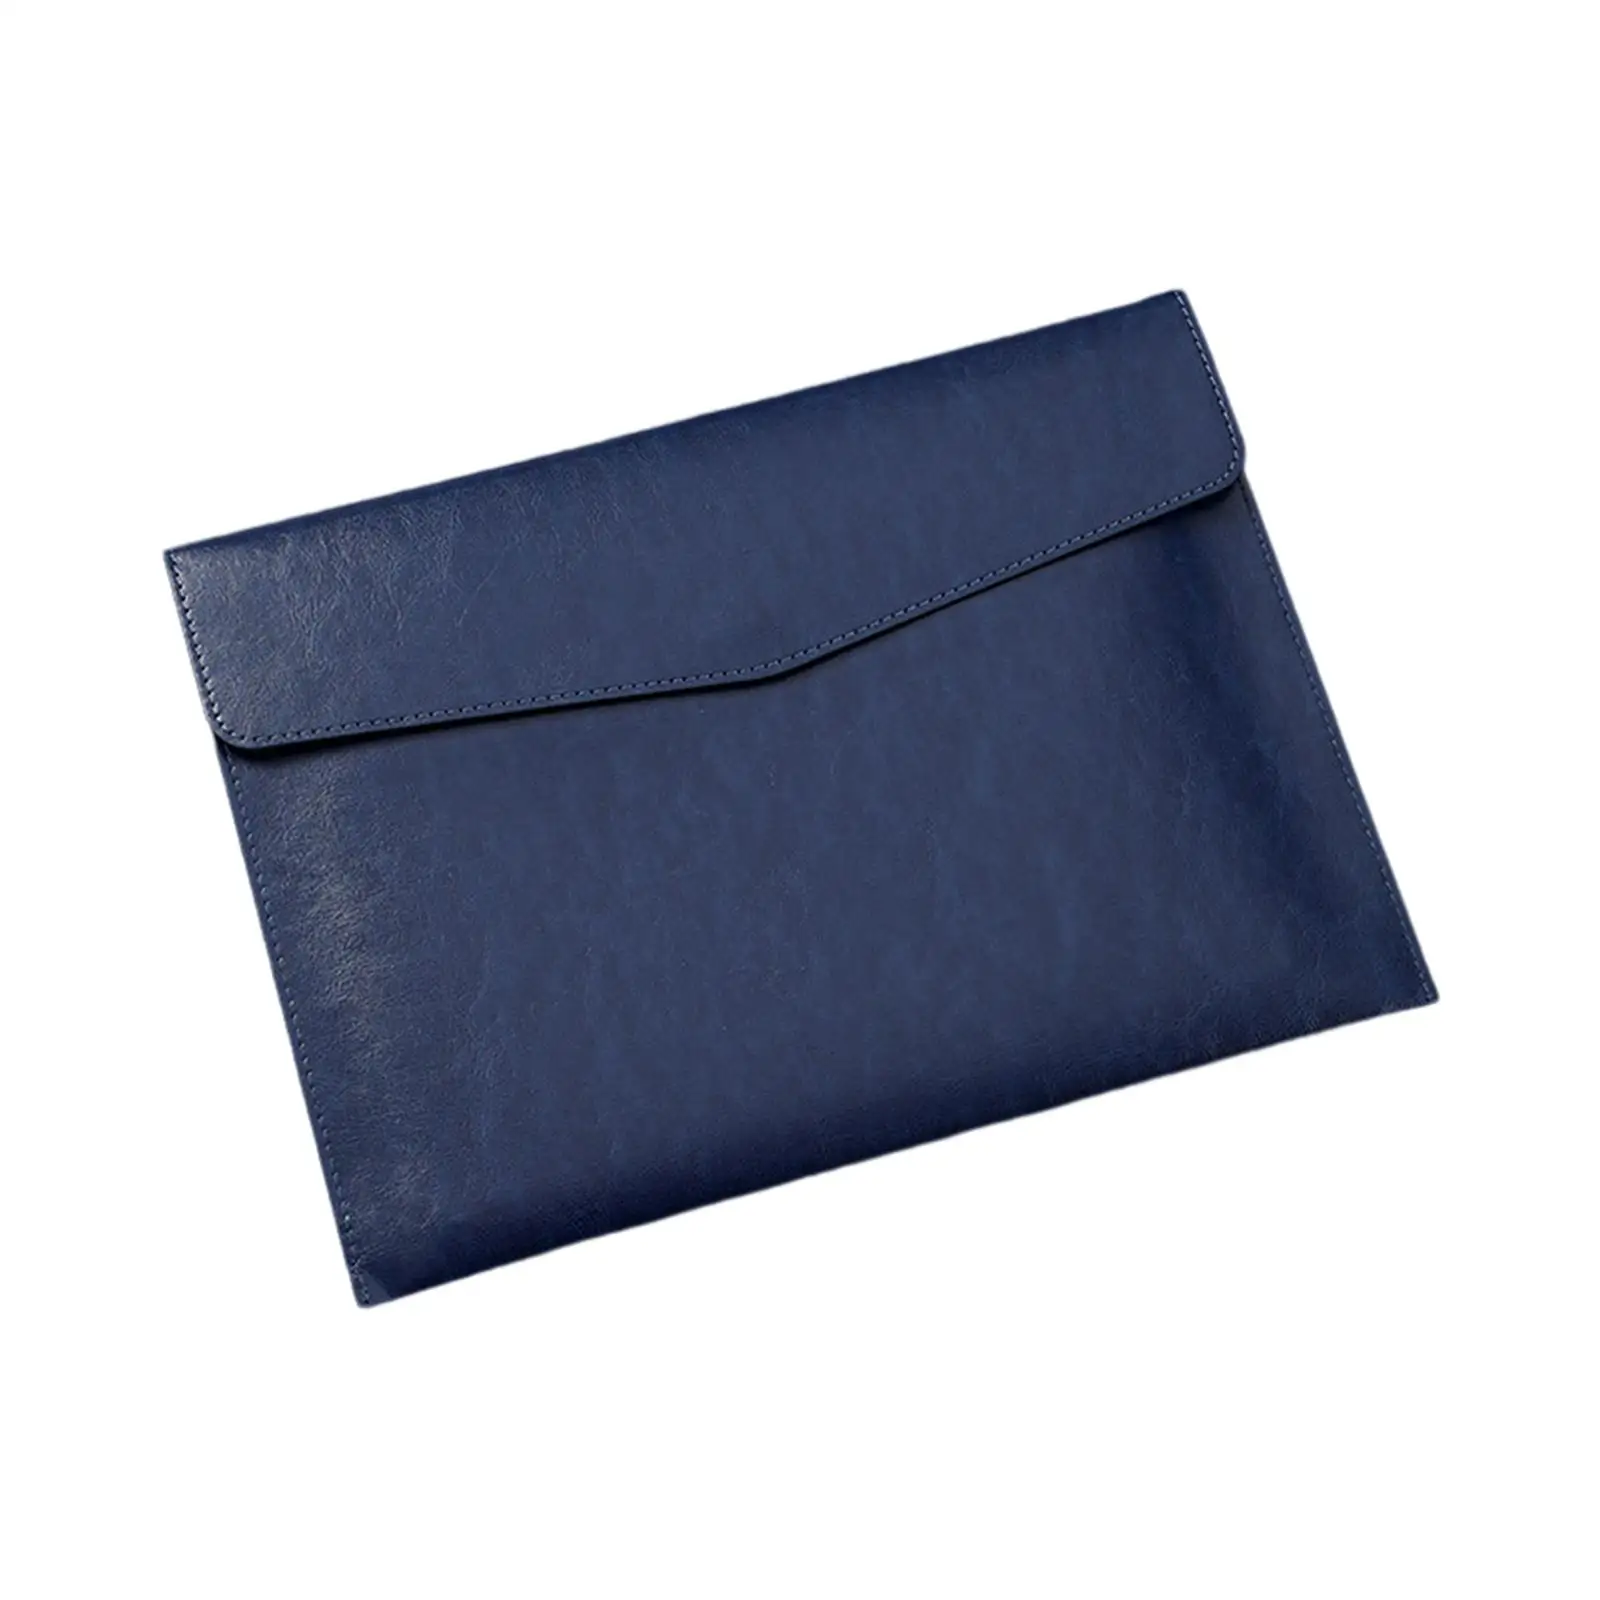 PU Leather Folder Waterproof with Pen Slots Multifunctional Envelope Folder Case for Company Office Teaching Commercial Business